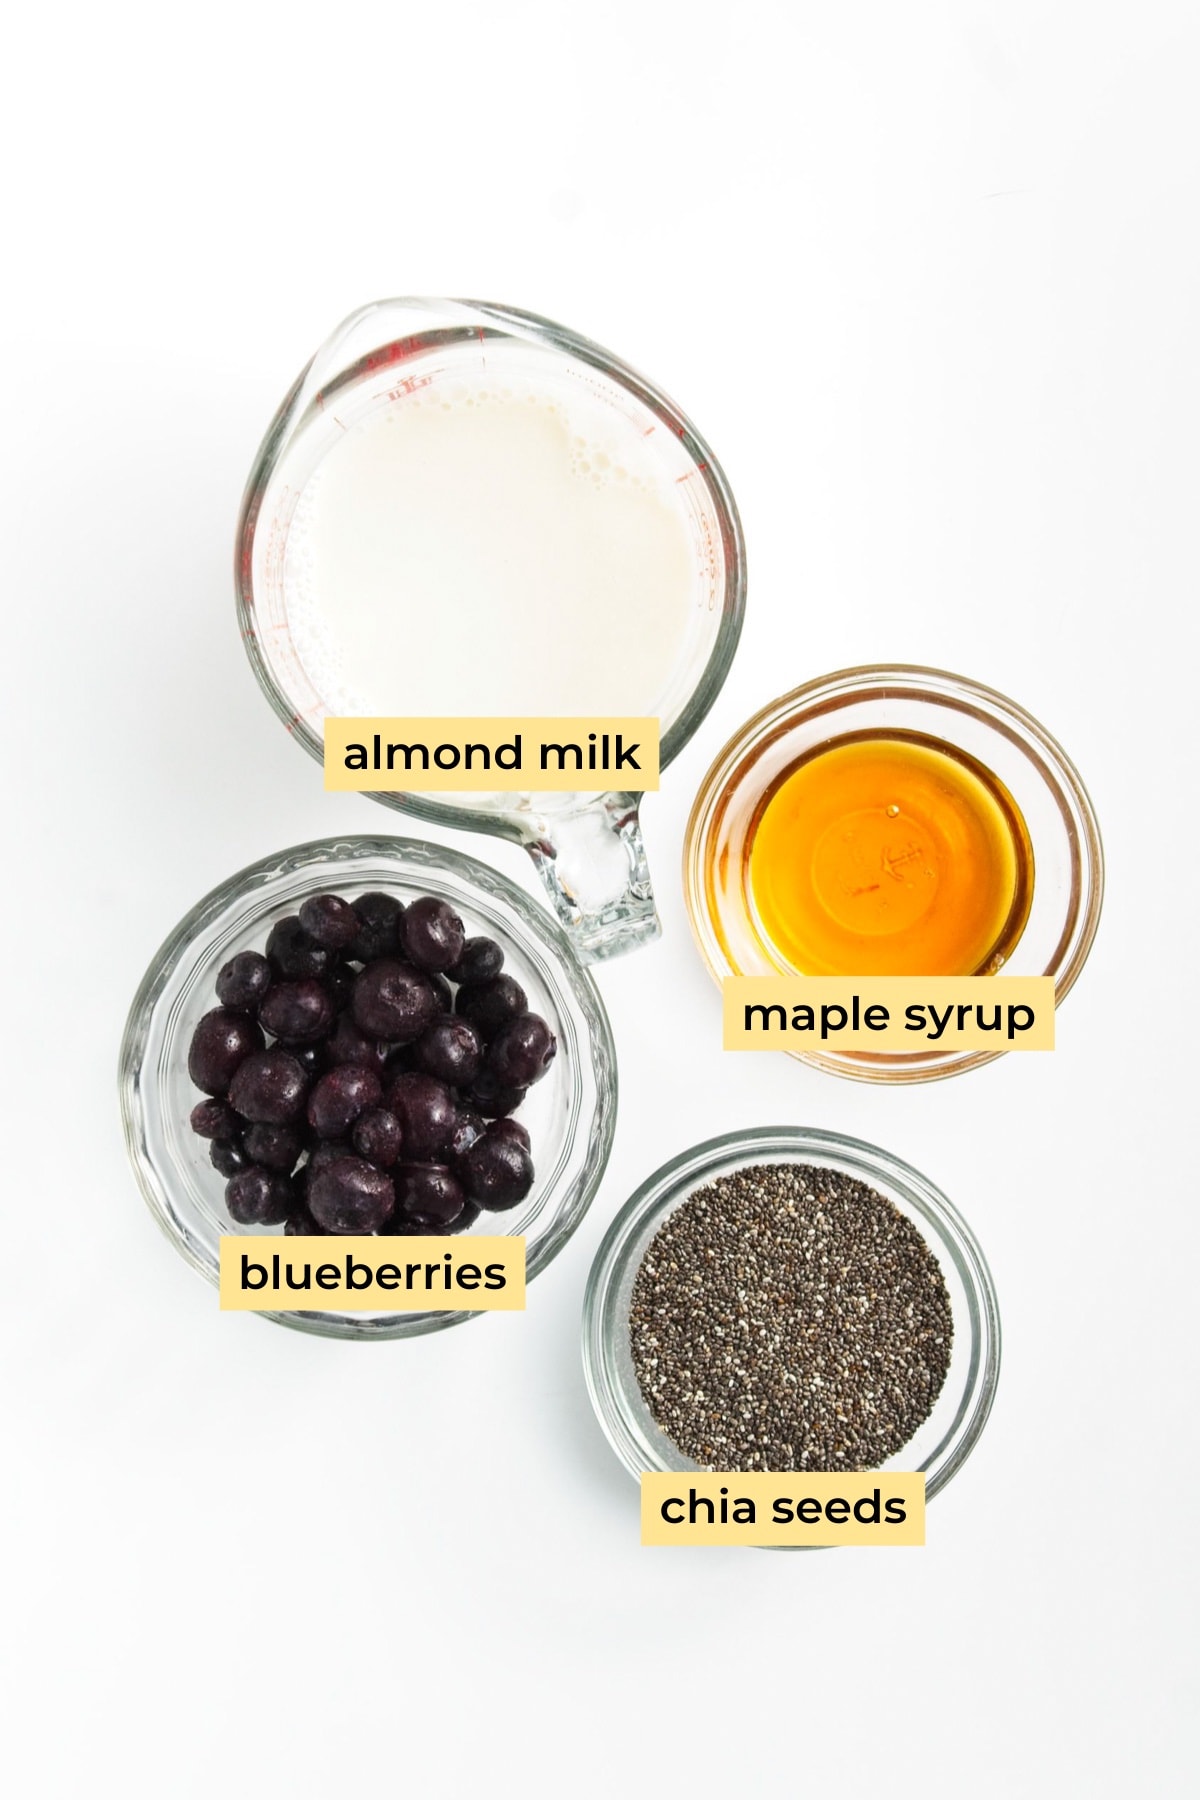 Ingredients in glass bowls: maple syrup, blueberries, chia seeds and almond milk.